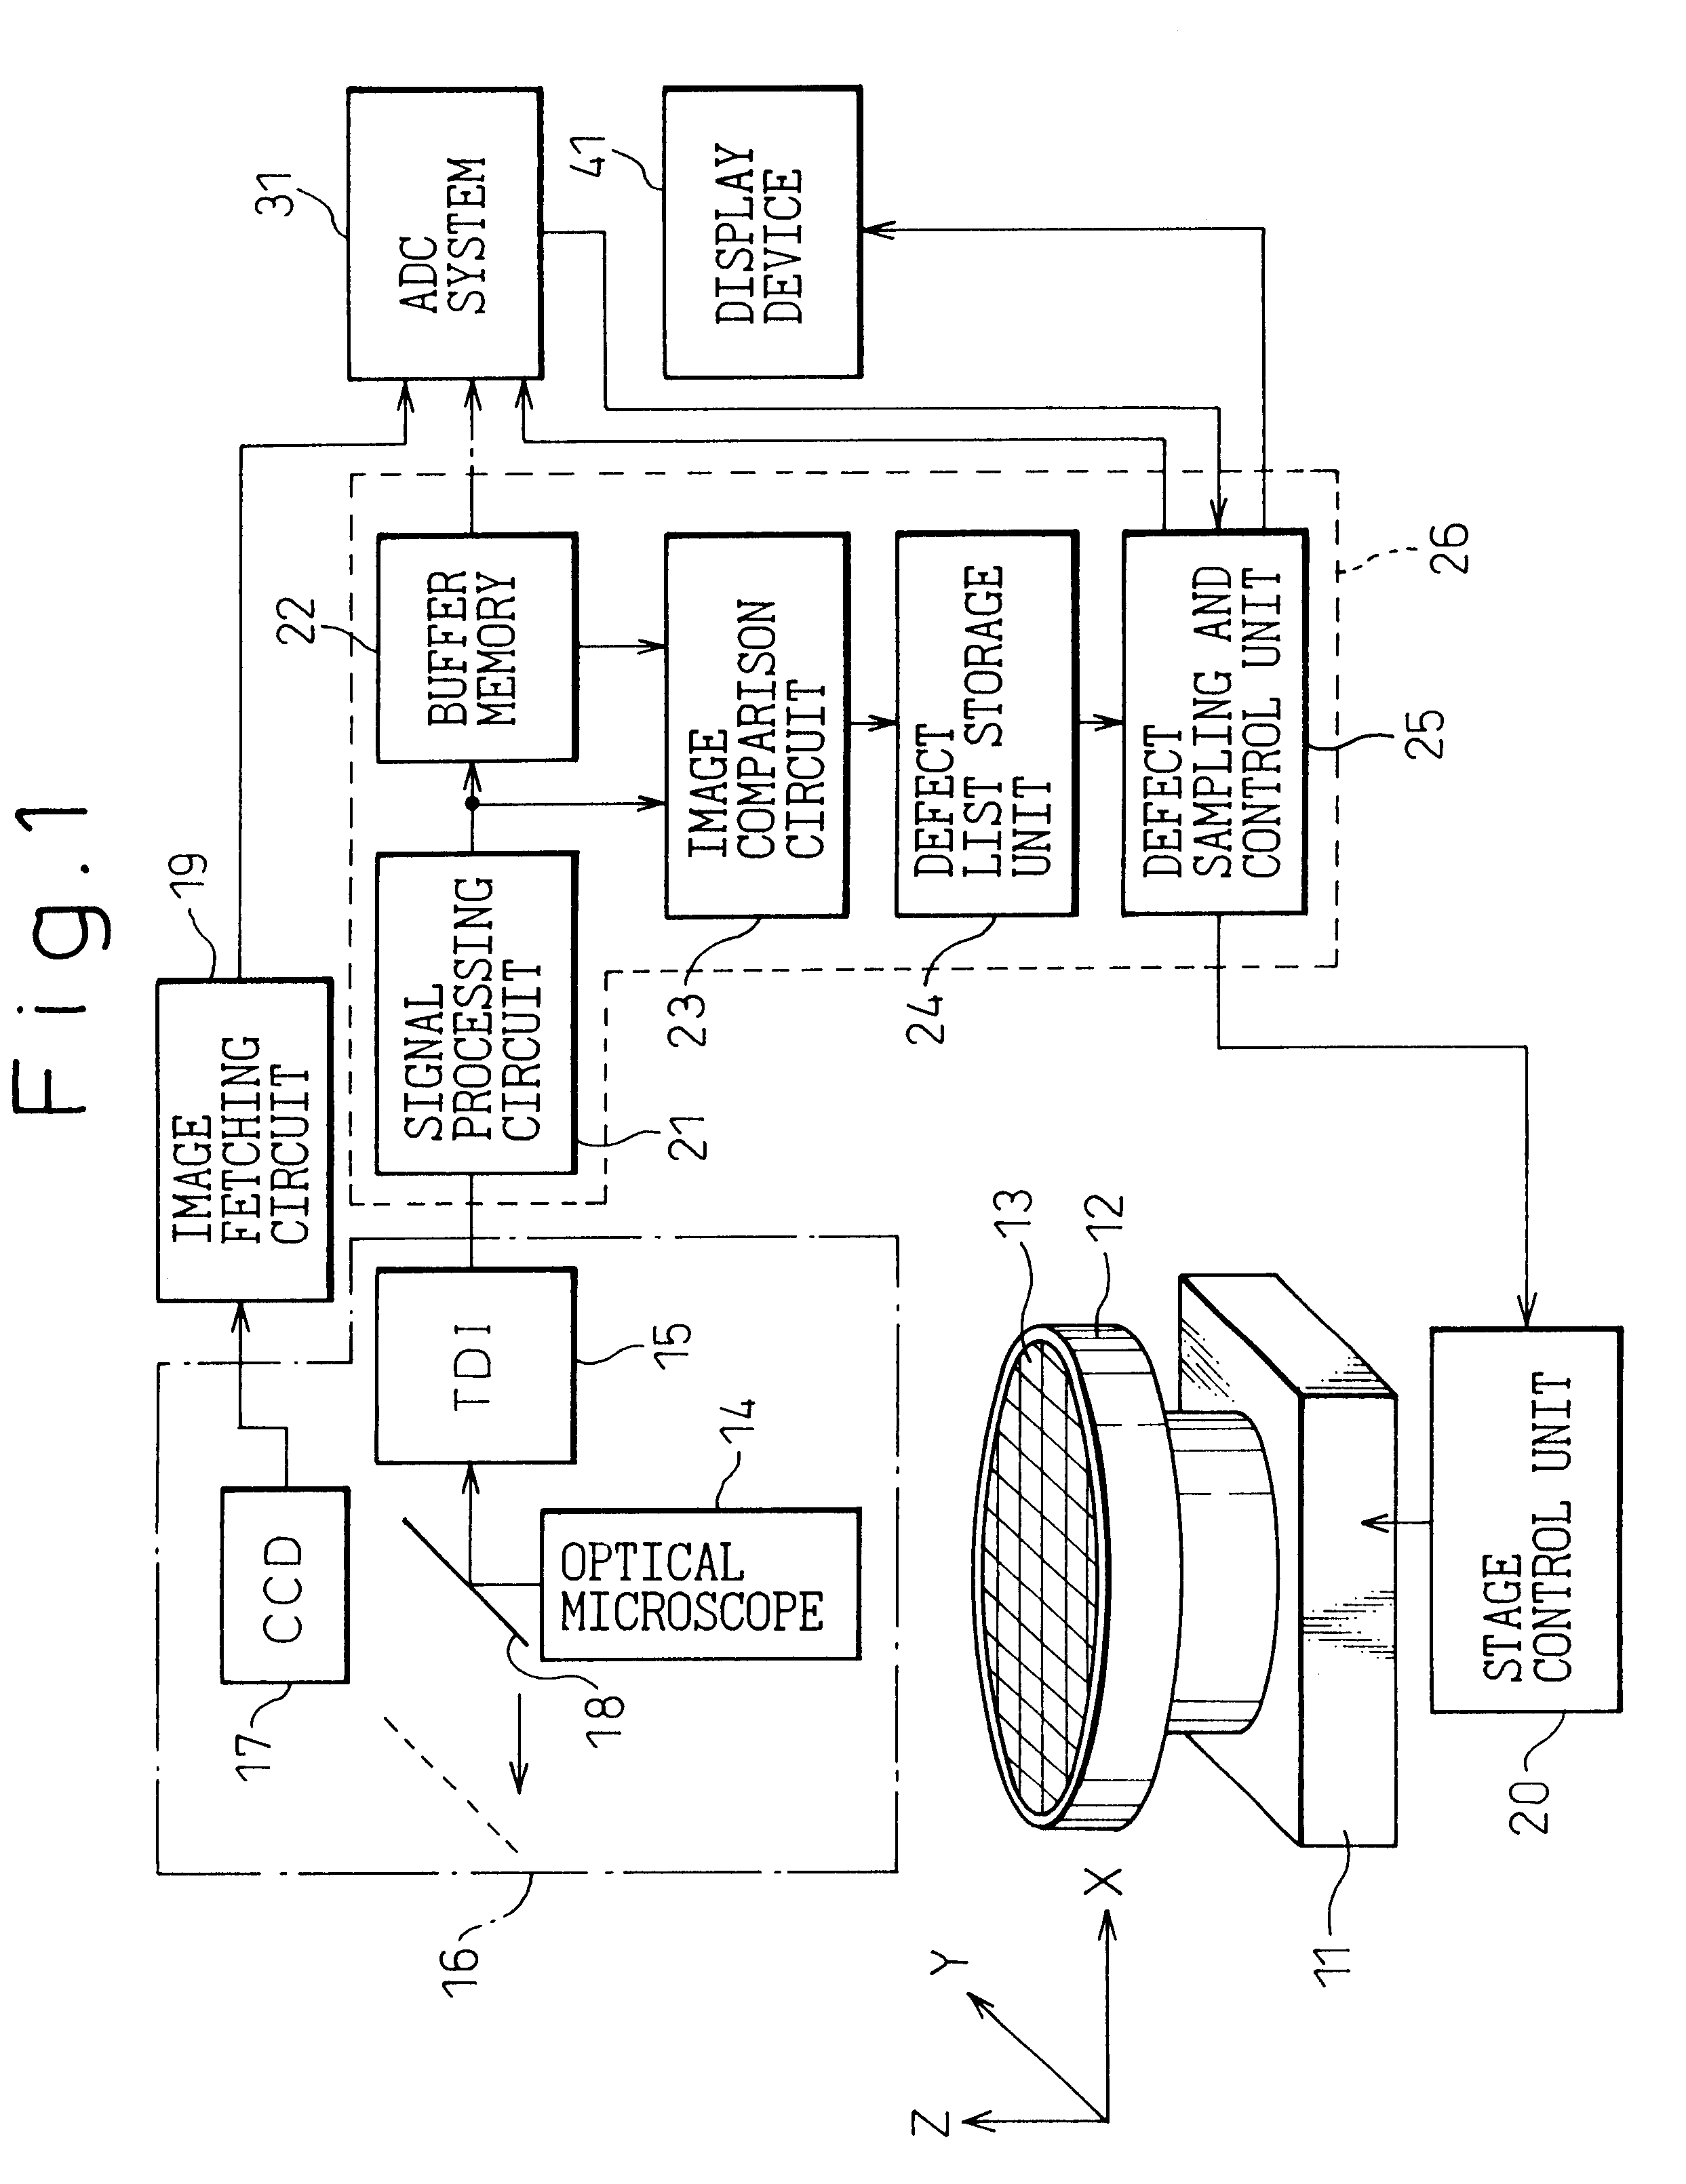 Appearance inspection machine and method for concurrently performing defect detection and classification